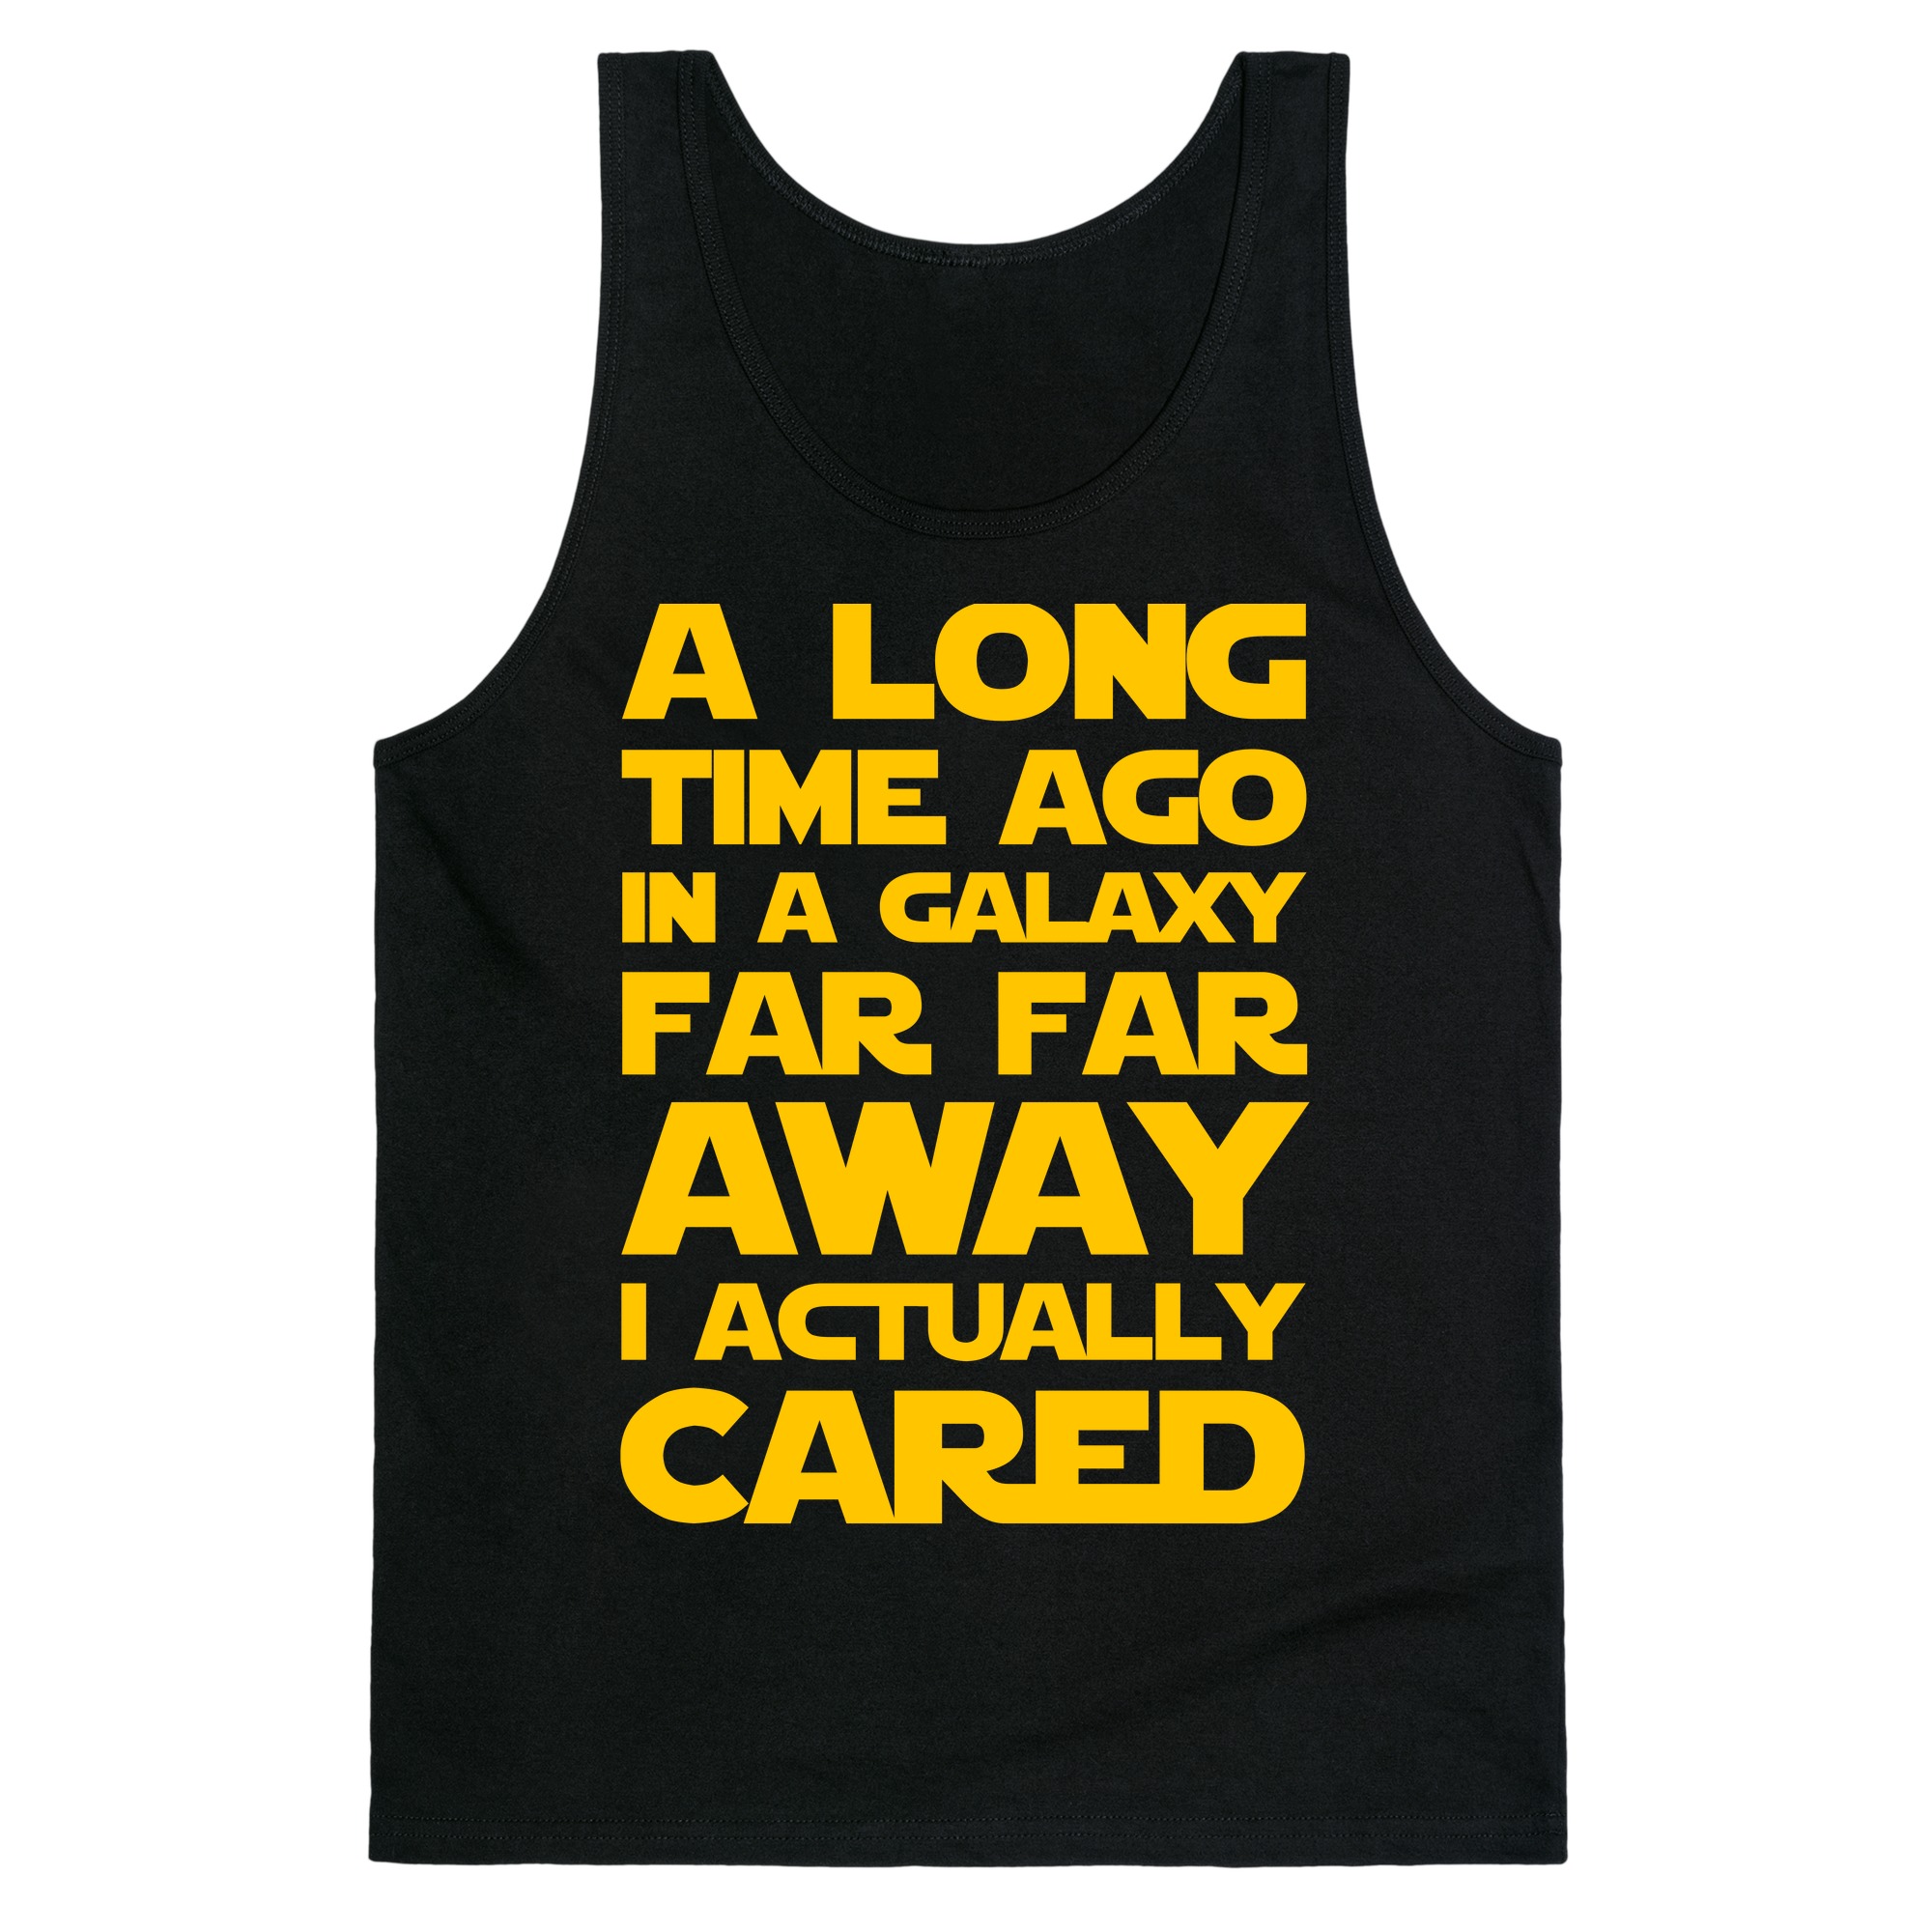 A Long Time Ago In A Galaxy Far Far Away I Used To Care Tank Tops Lookhuman